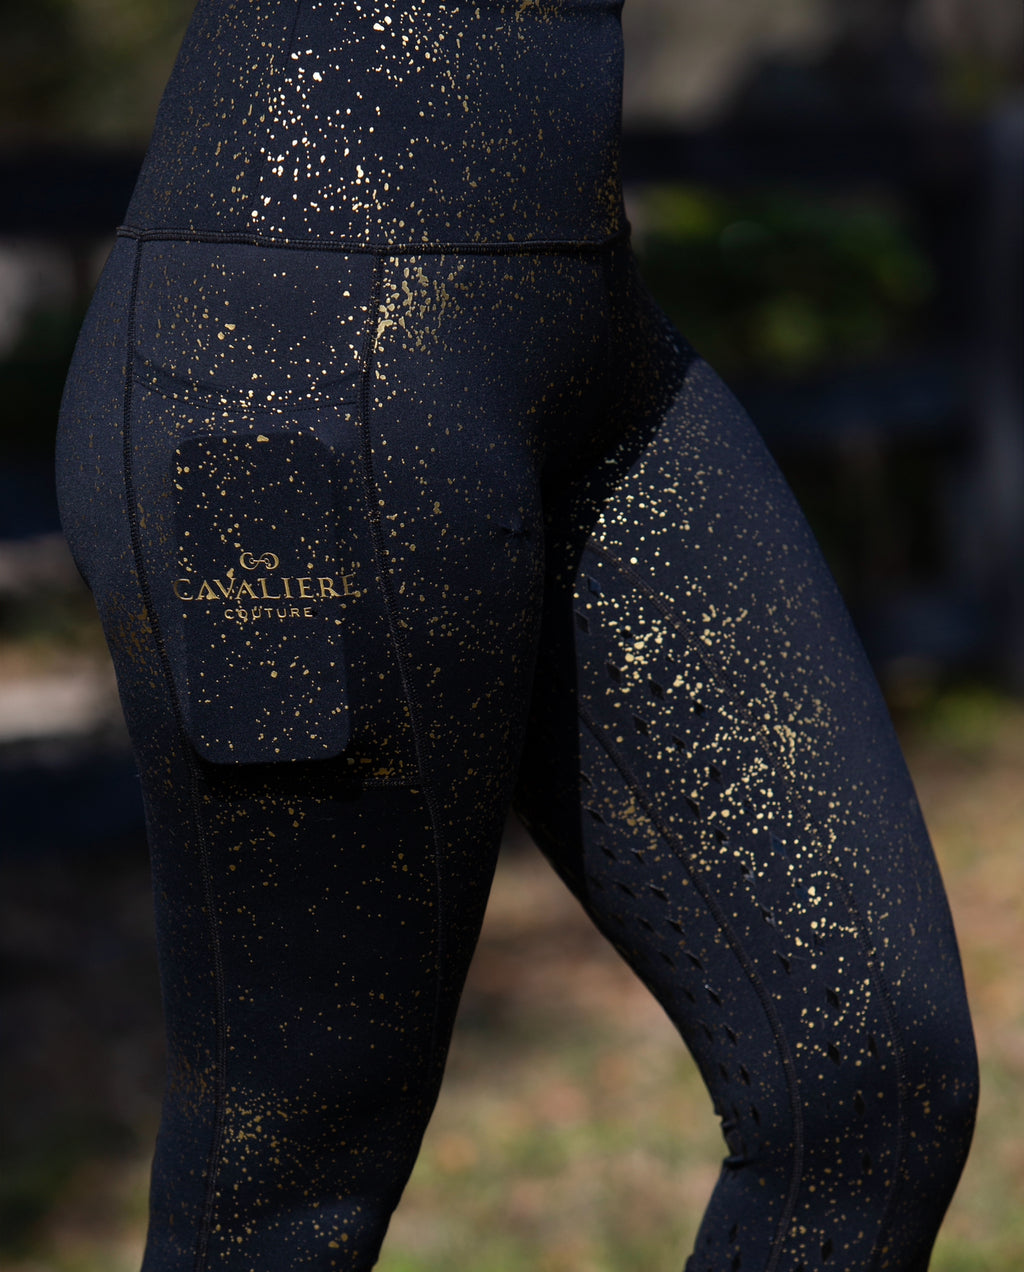 New Hype: Riders rely on riding leggings